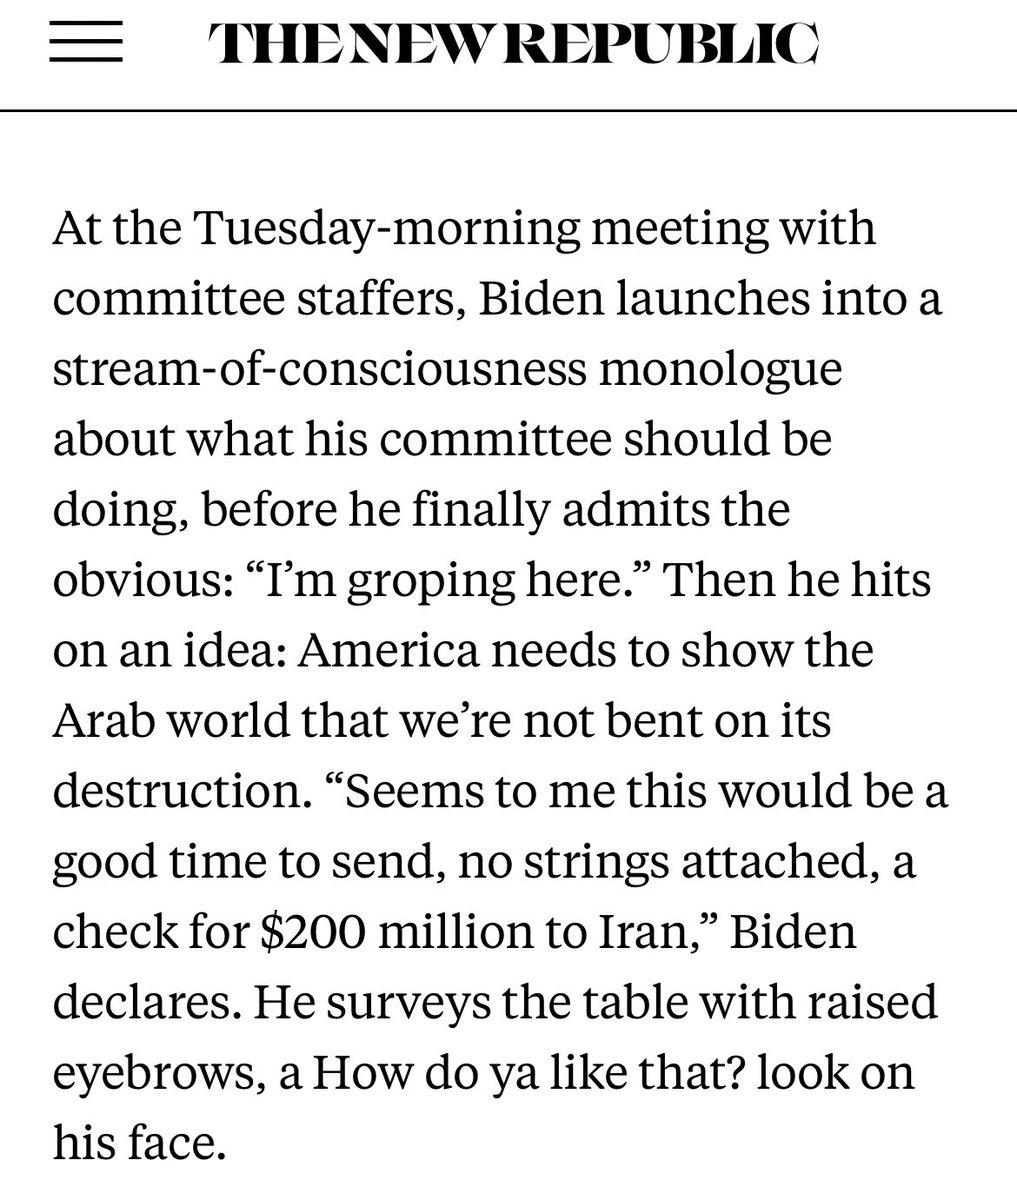 I’m reminded that in response to 9/11 Biden thought it’d be a great idea to send $200 million to Iran “no strings attached”